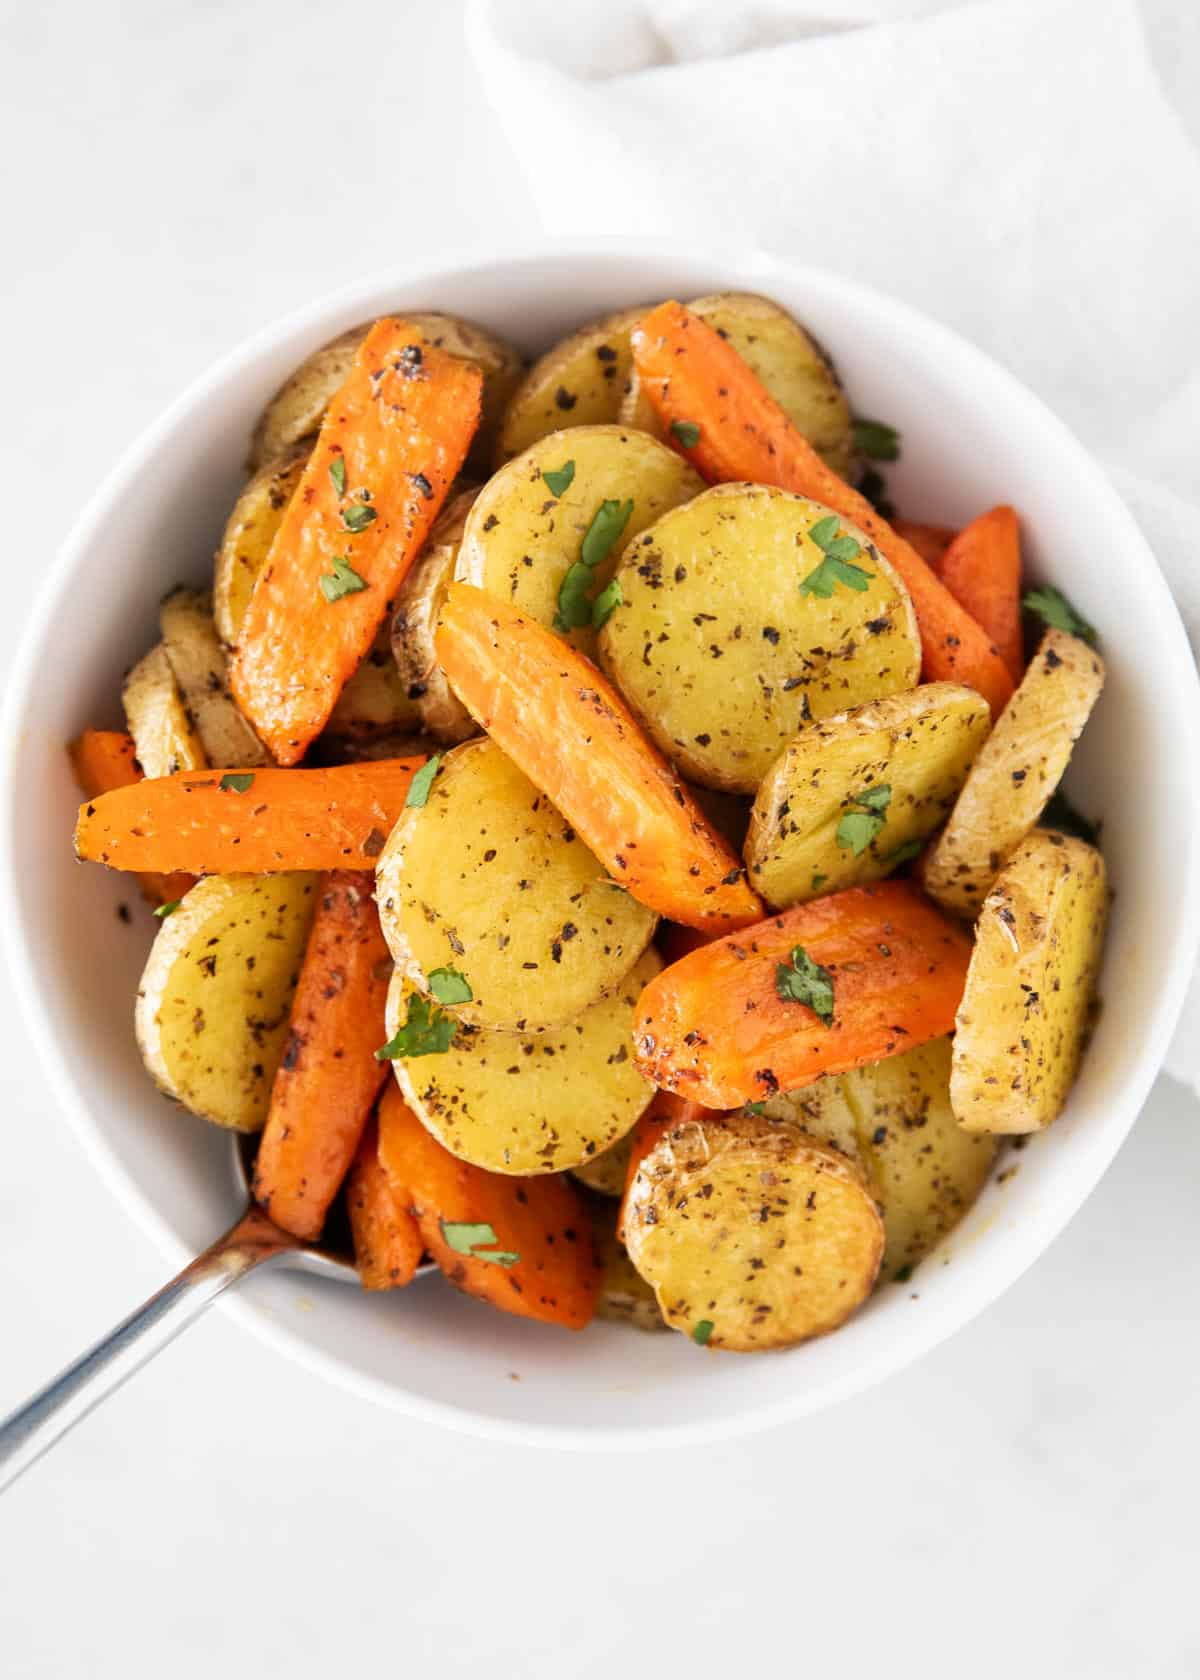 Roasted potatoes and carrots in bowl.